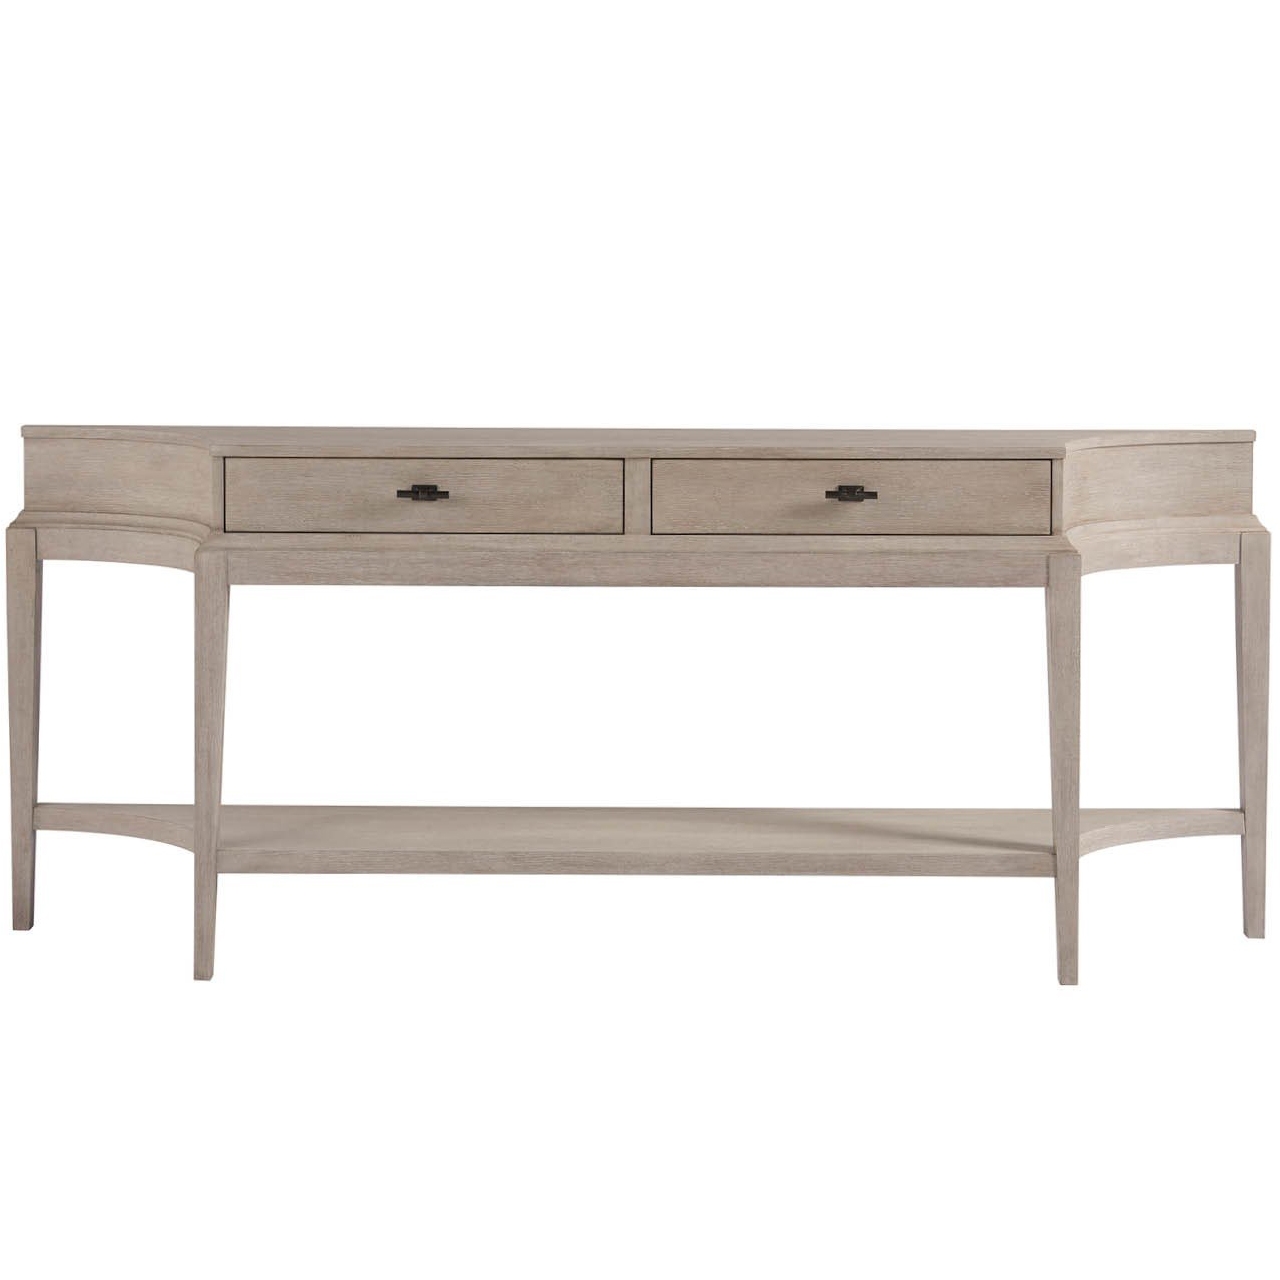 Adeline French Country Grey 2 Drawer Wood Console Table - Image 1